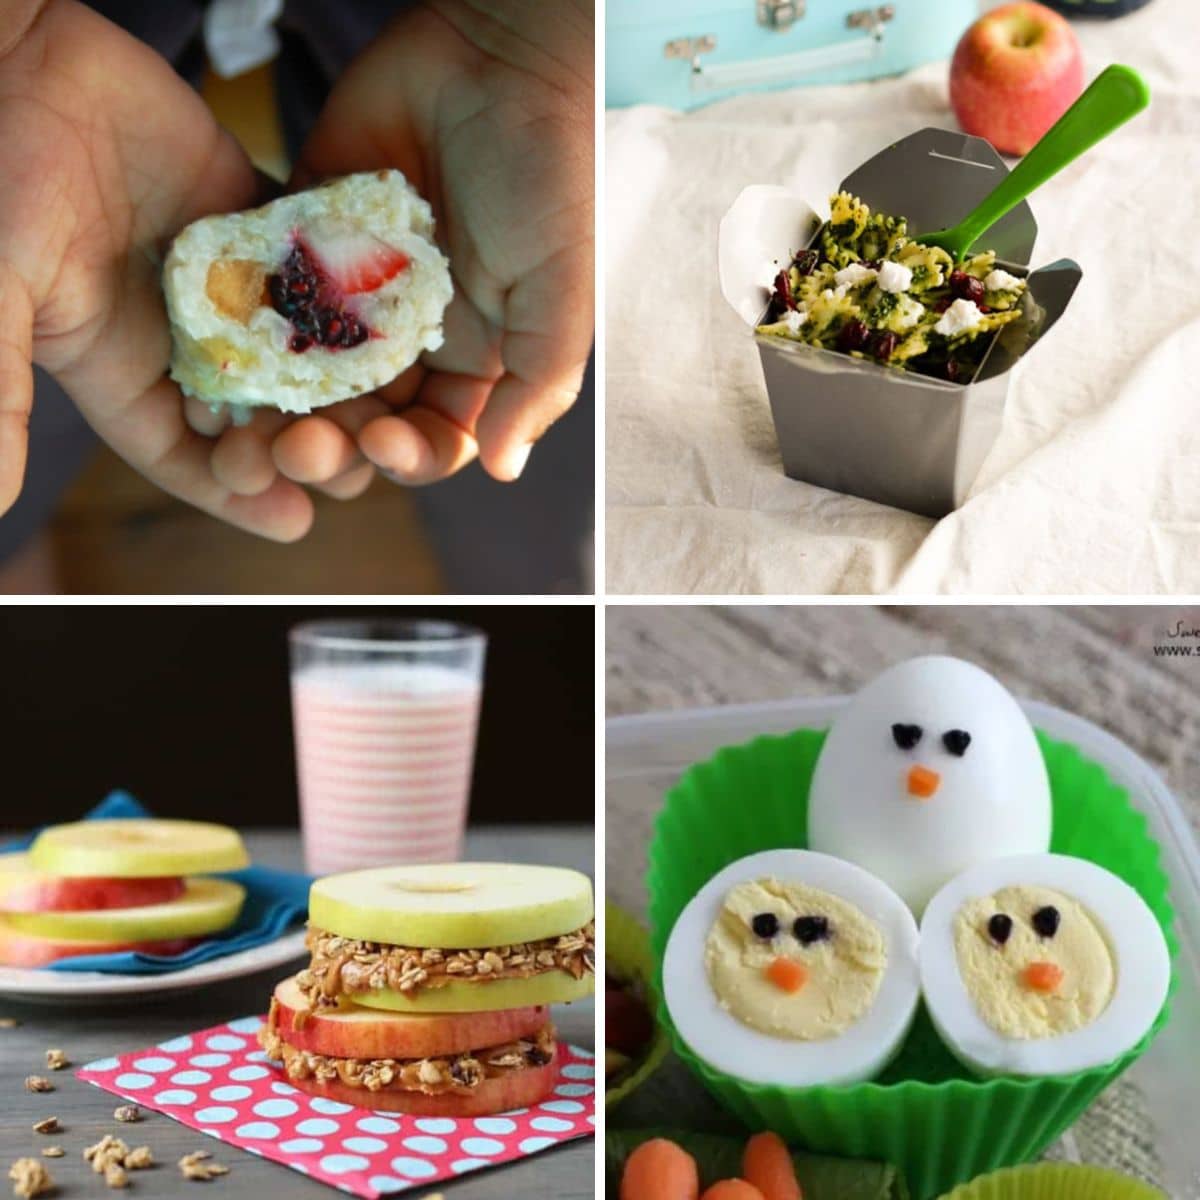 4 images of non sandwich lunch box ideas.